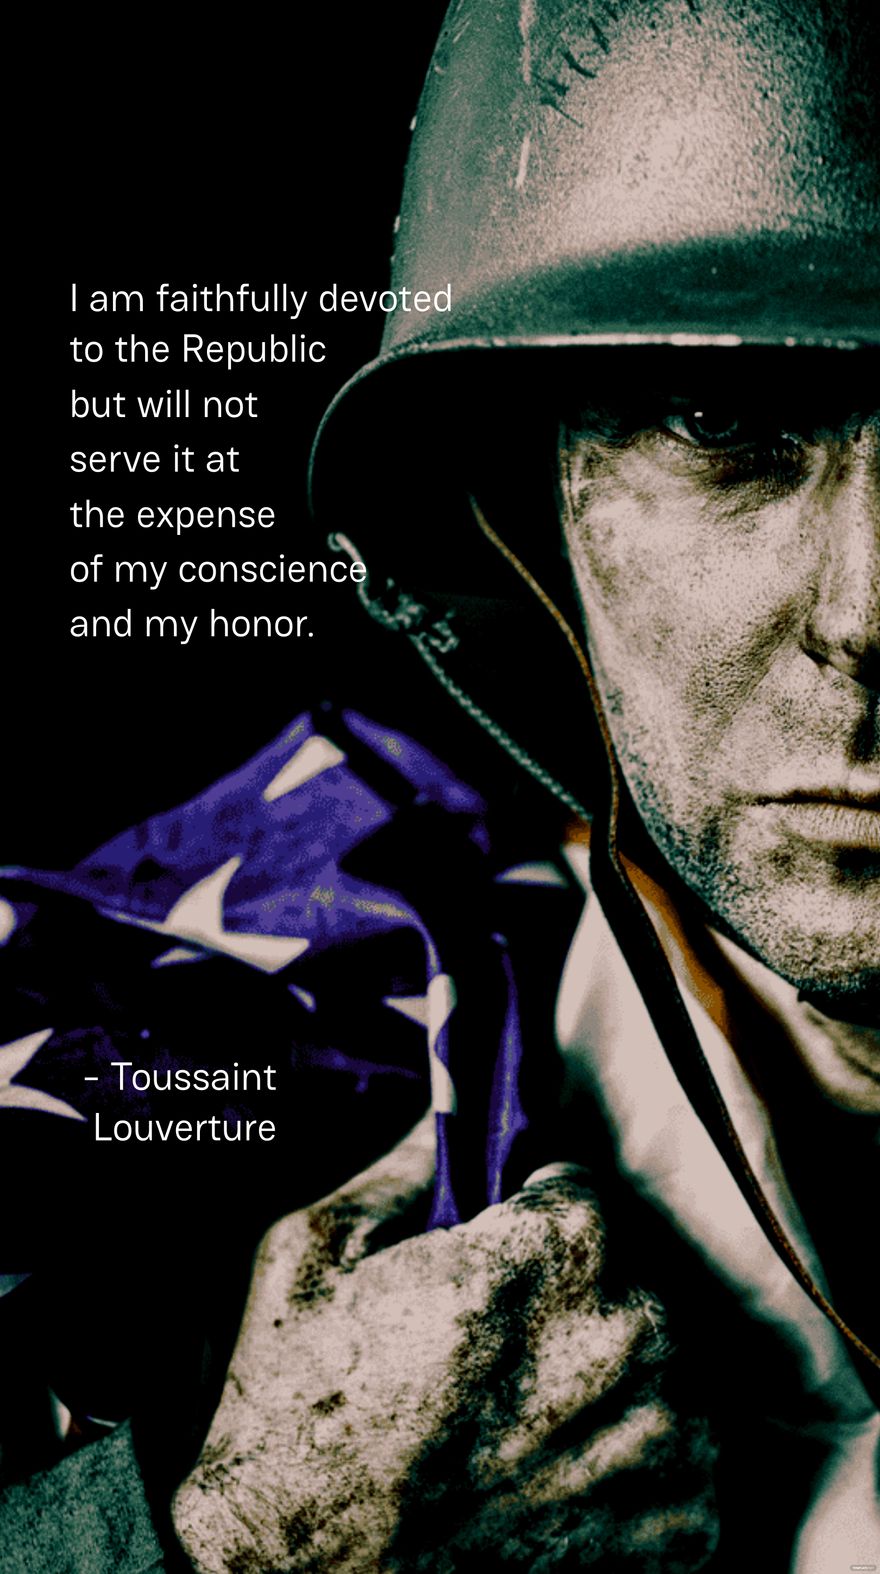 Free I am faithfully devoted to the Republic but will not serve it at the expense of my conscience and my honor. - Toussaint Louverture in JPEG